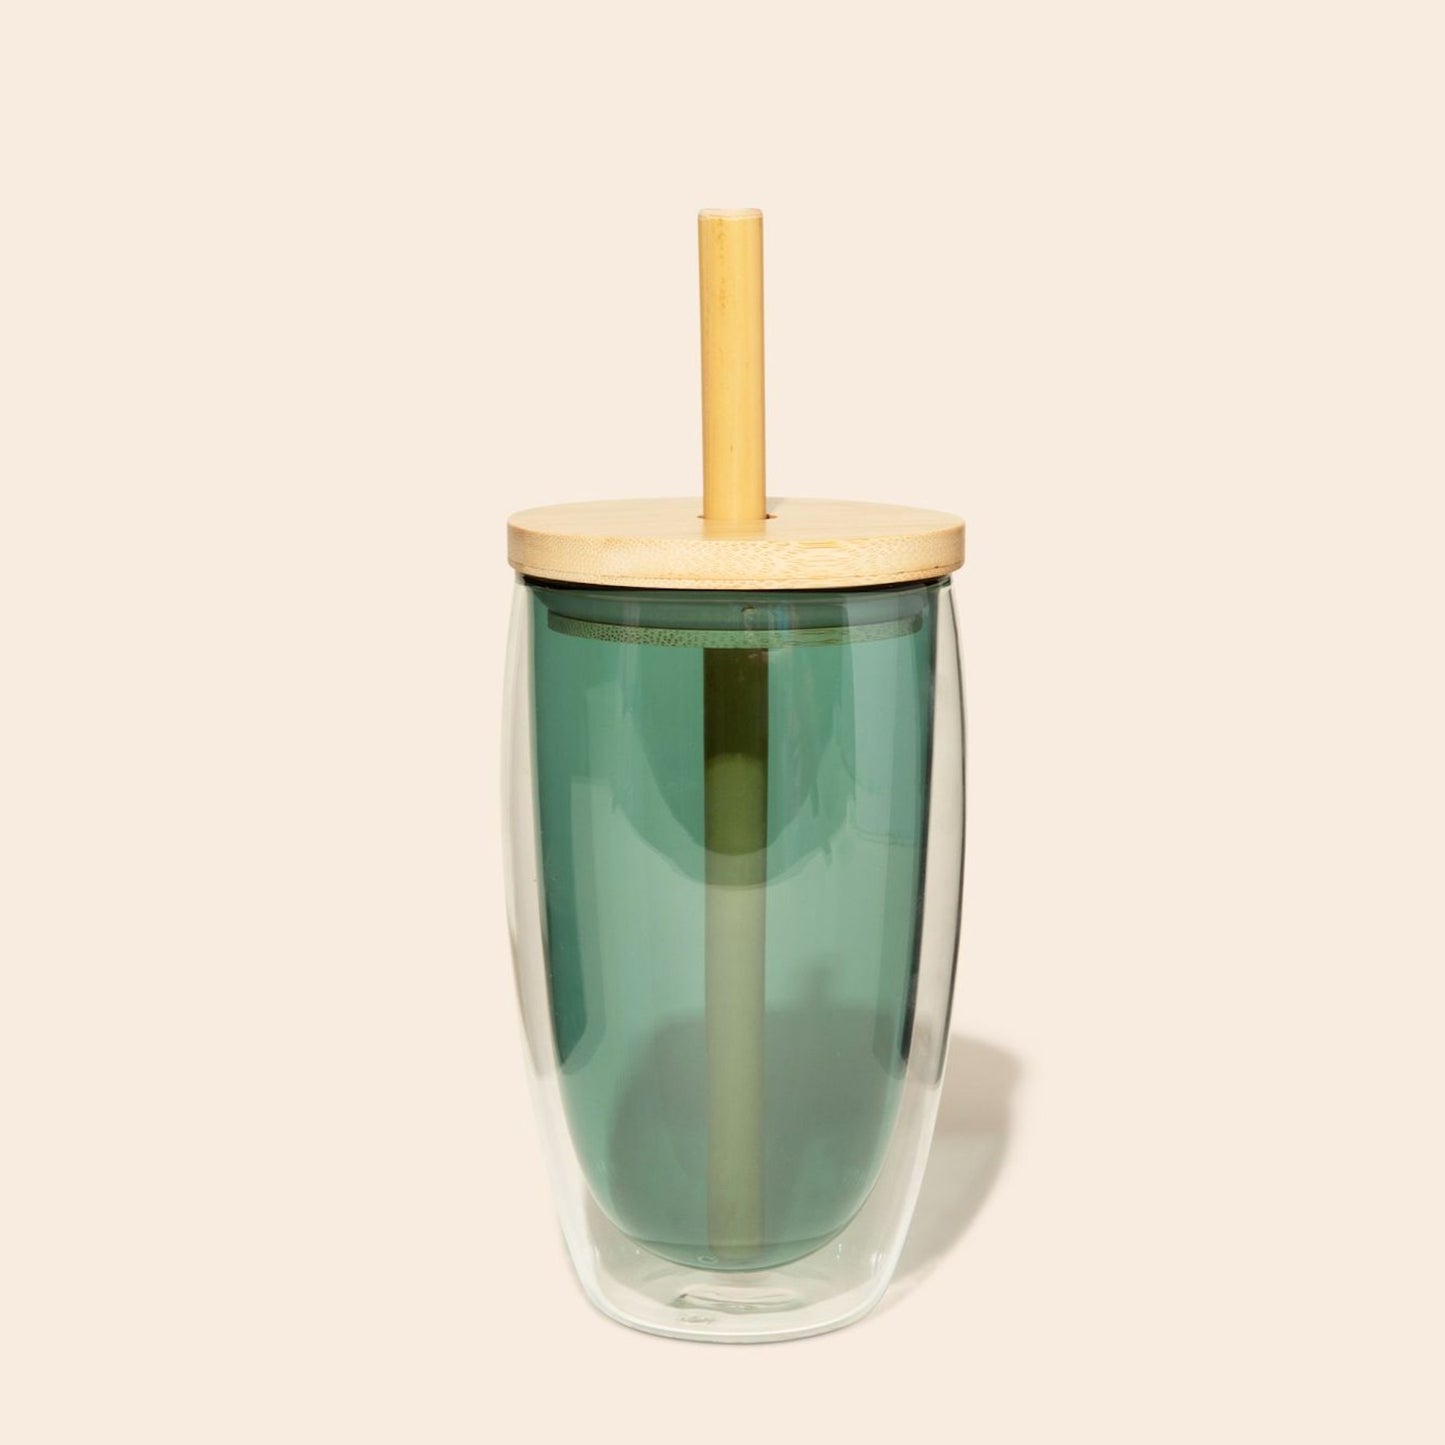 sustainable, zero waste, earth-friendly, plastic-free Glass Cup With Straw - Bamboo Switch